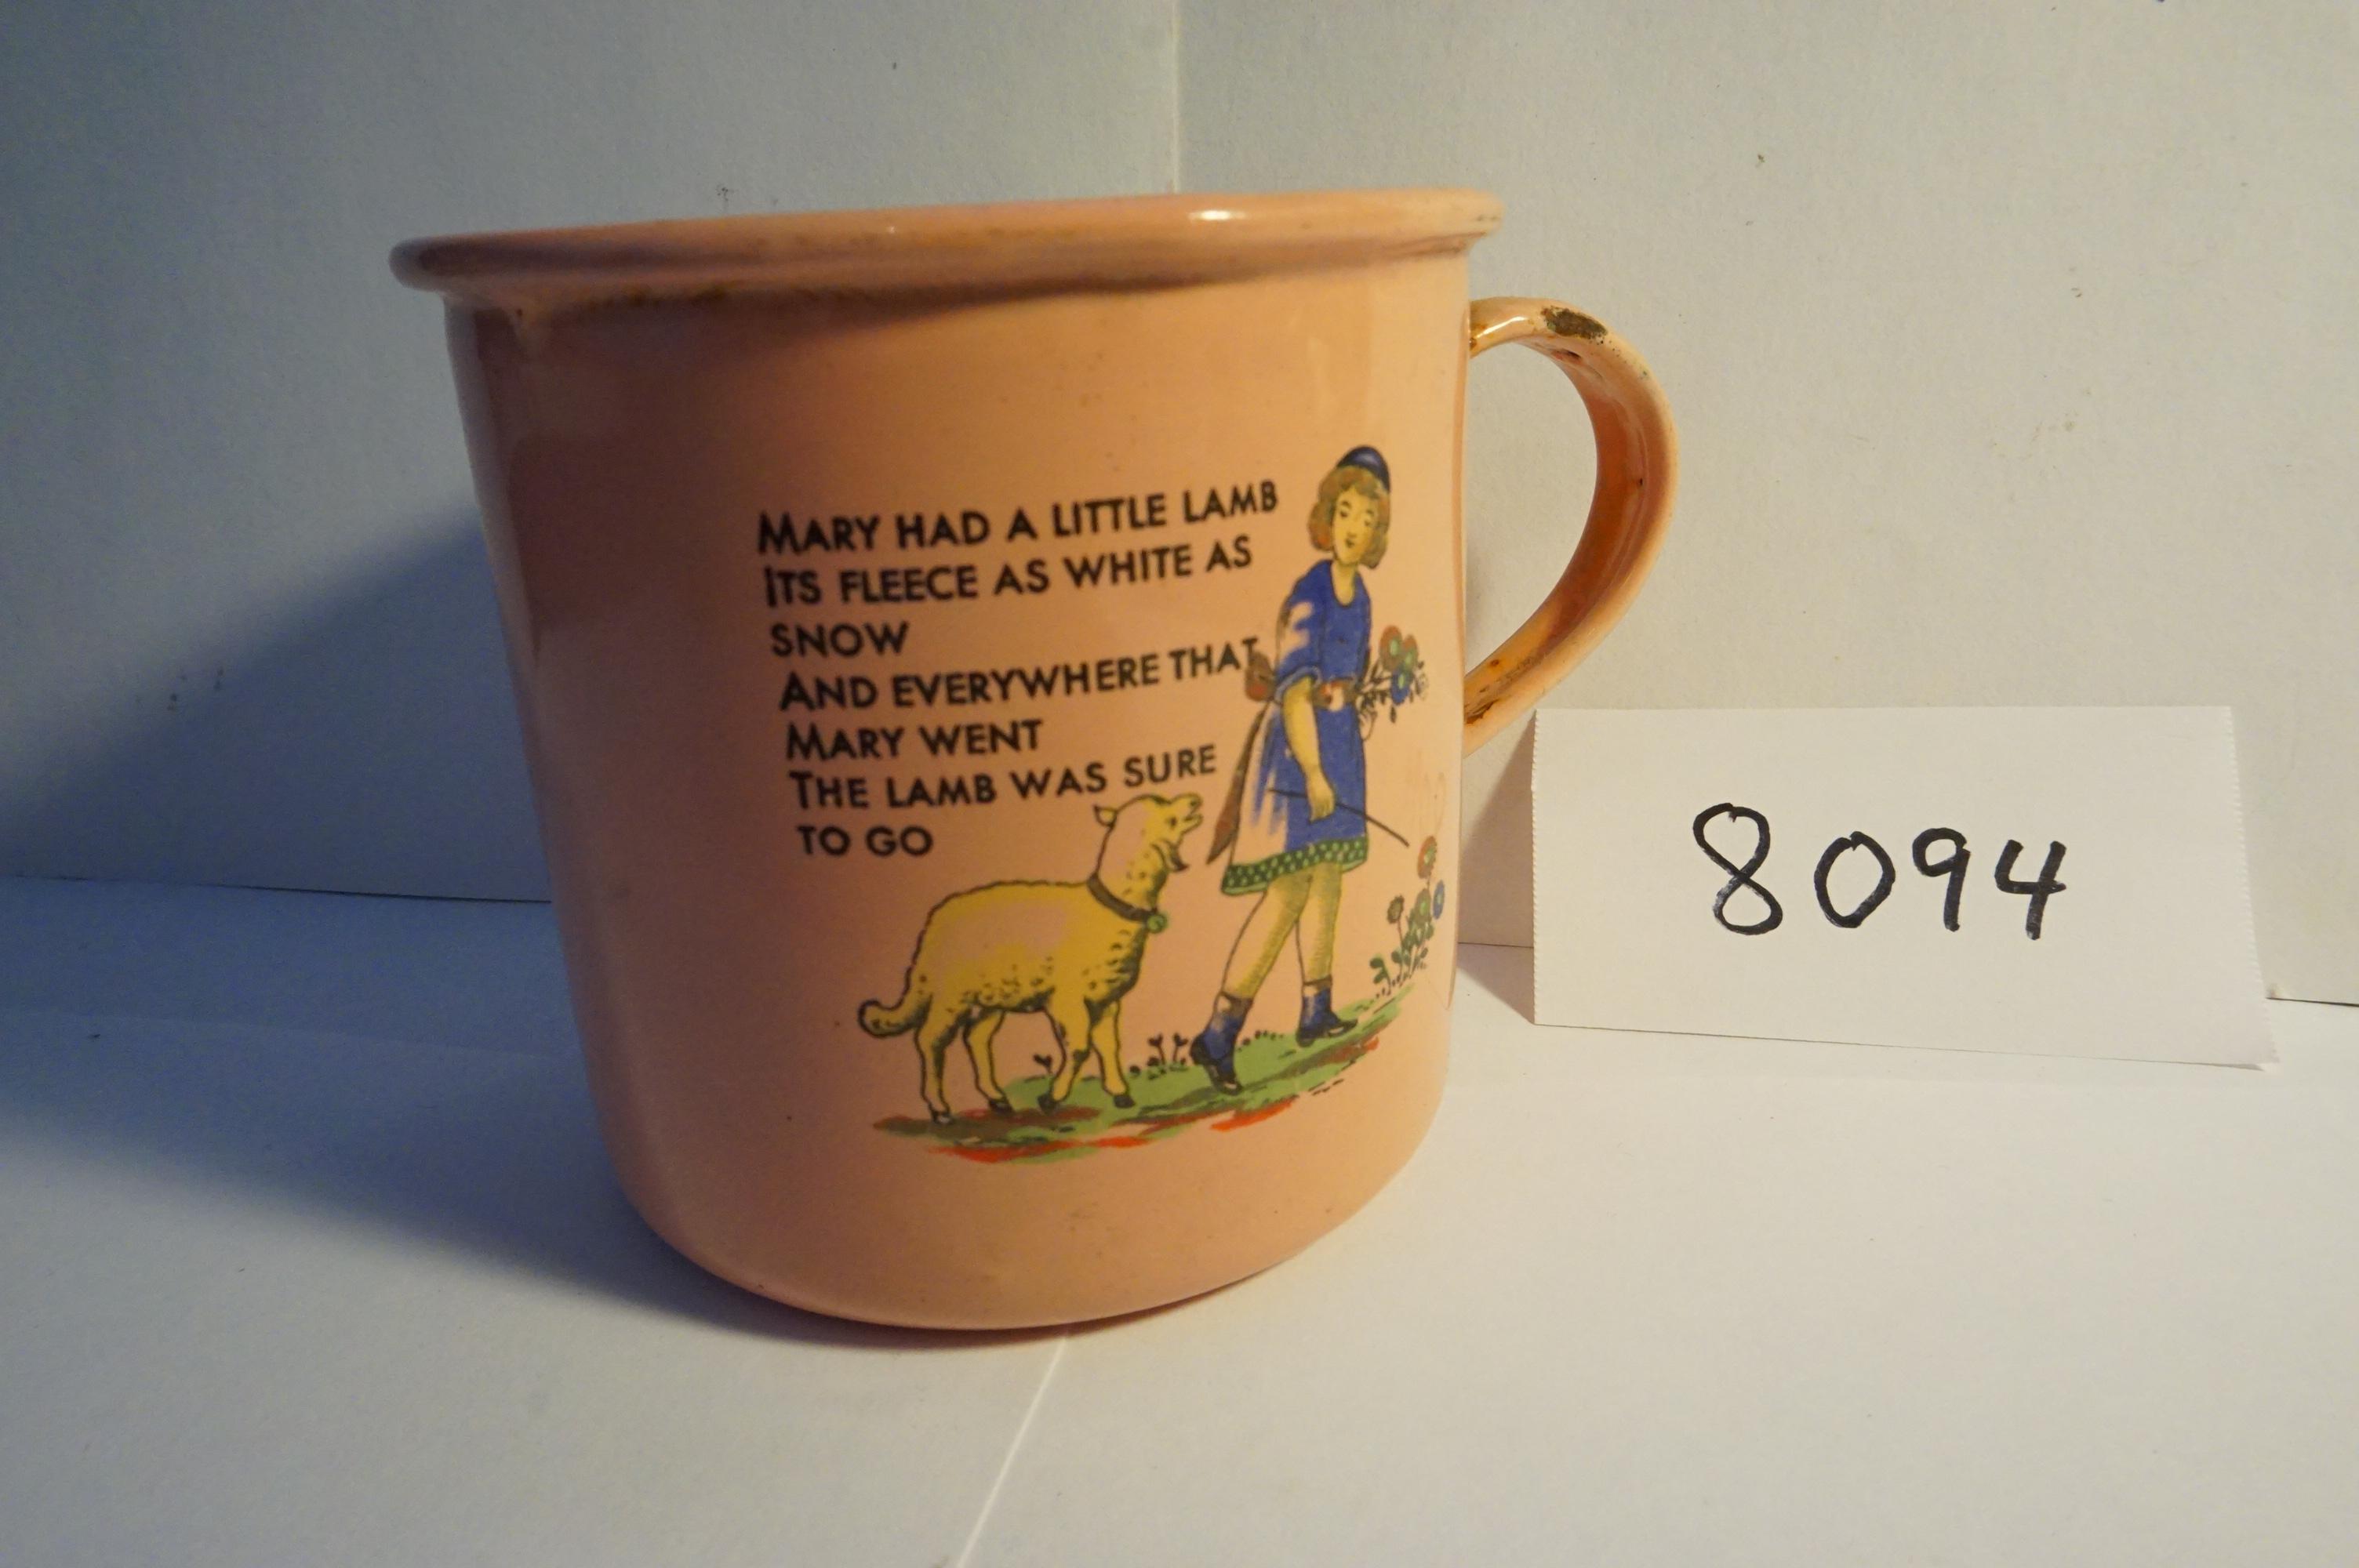 OLD! Porcelain Cup "Mary had a Little Lamb..."  made in Sweden, does have chipping of porcelain